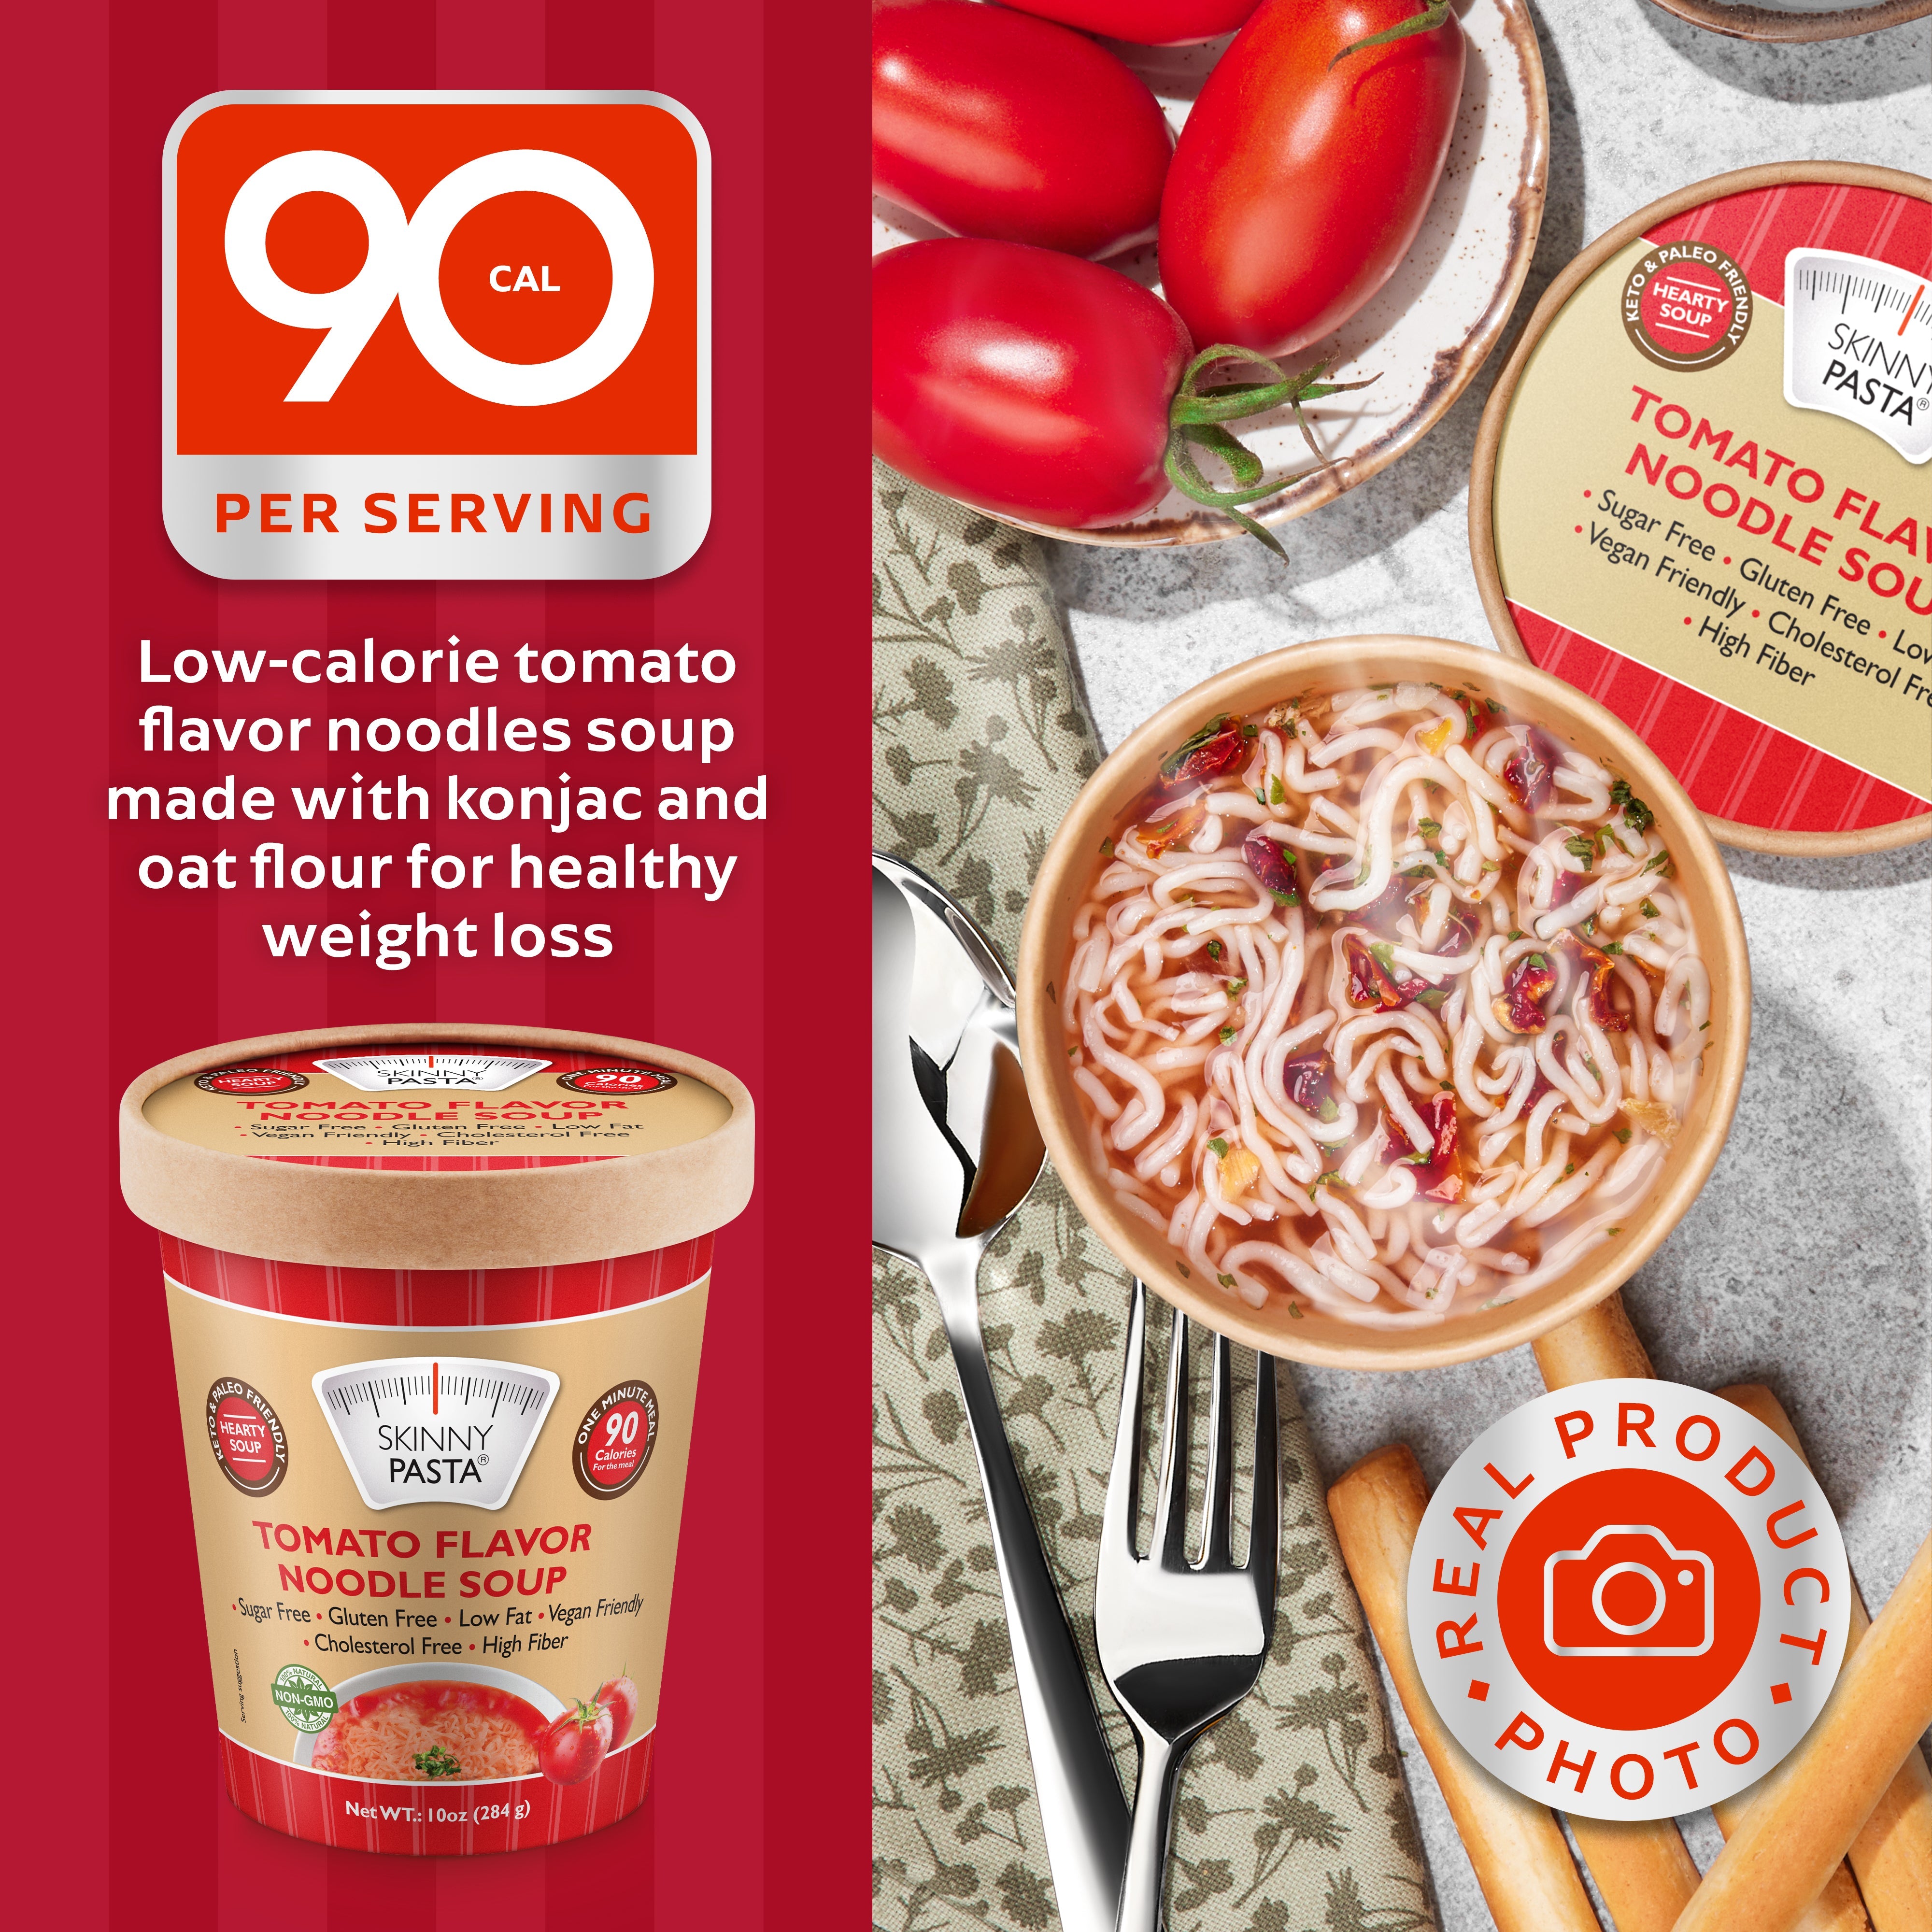 Skinny Soup Tomato Flavor - 24 Pack: Instant, Low-Calorie, Ready-to-Eat Noodles